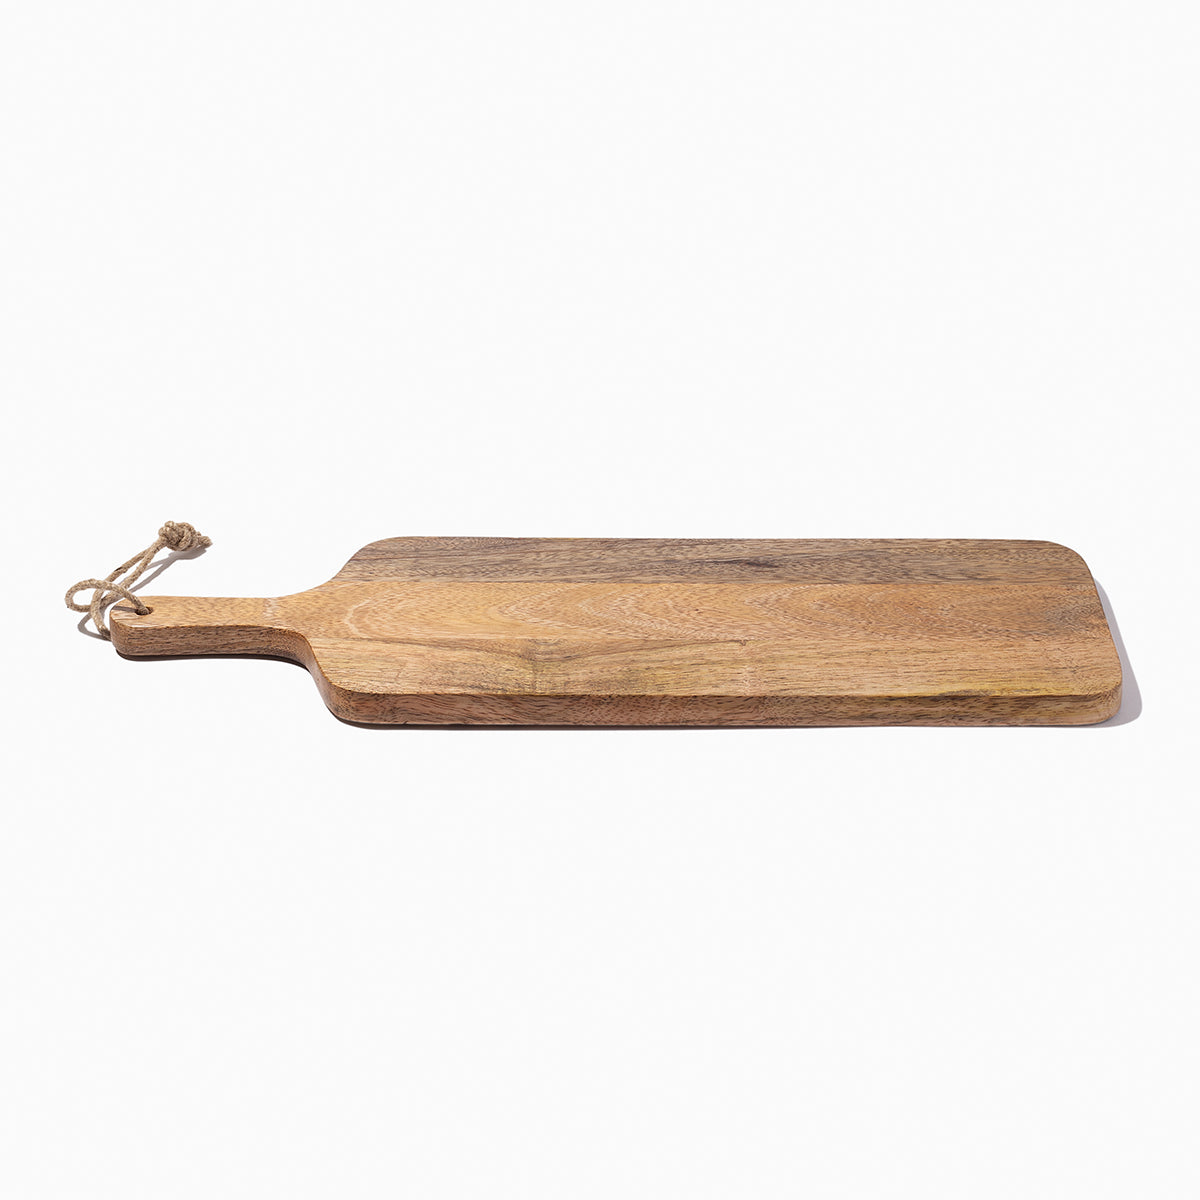 Wooden Chopping Board | Product Detail Image | Uncommon James Home